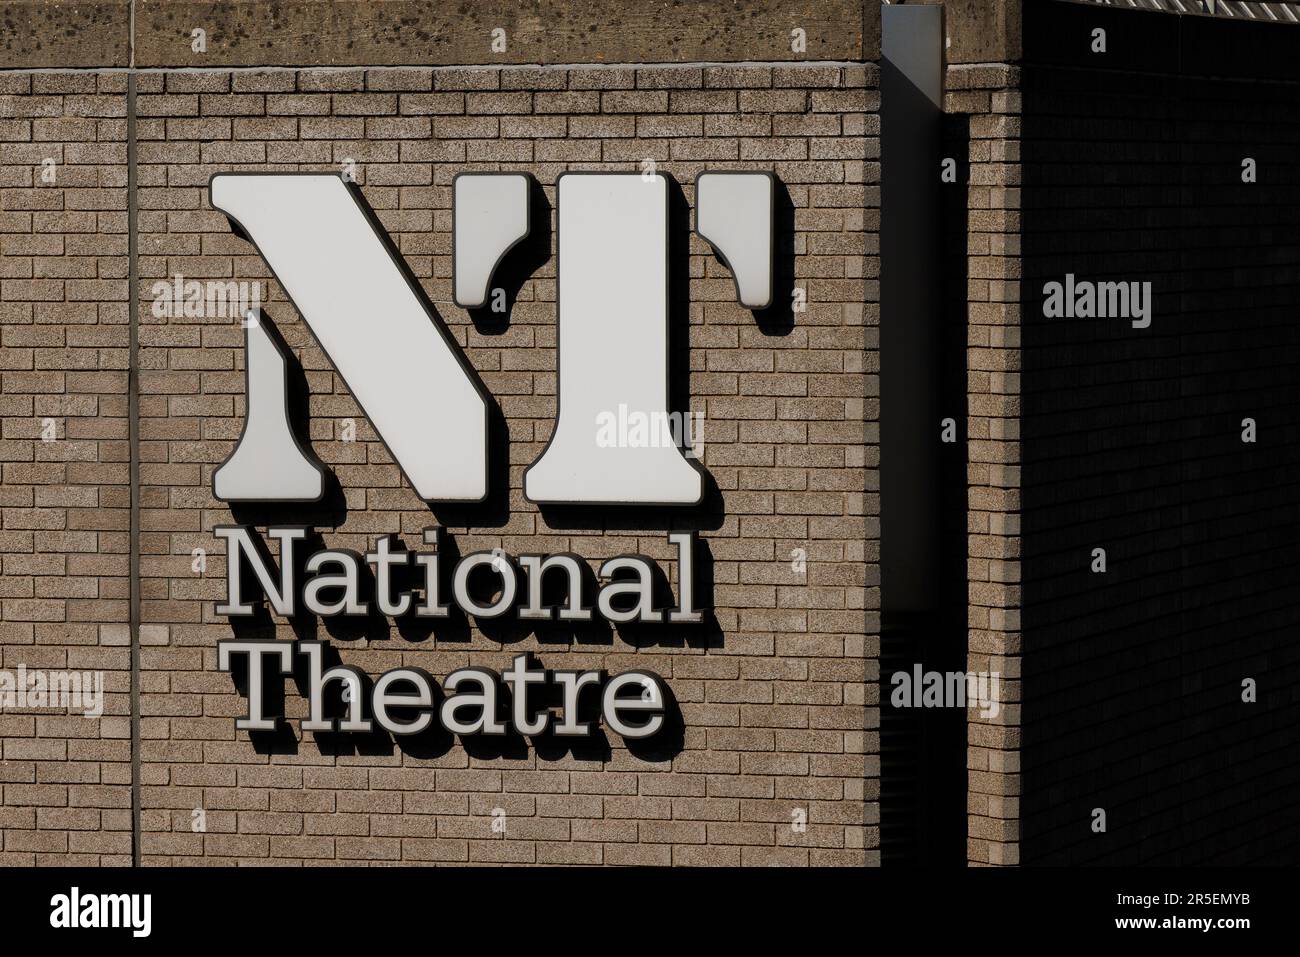 National Theatre Sign Stock Photo